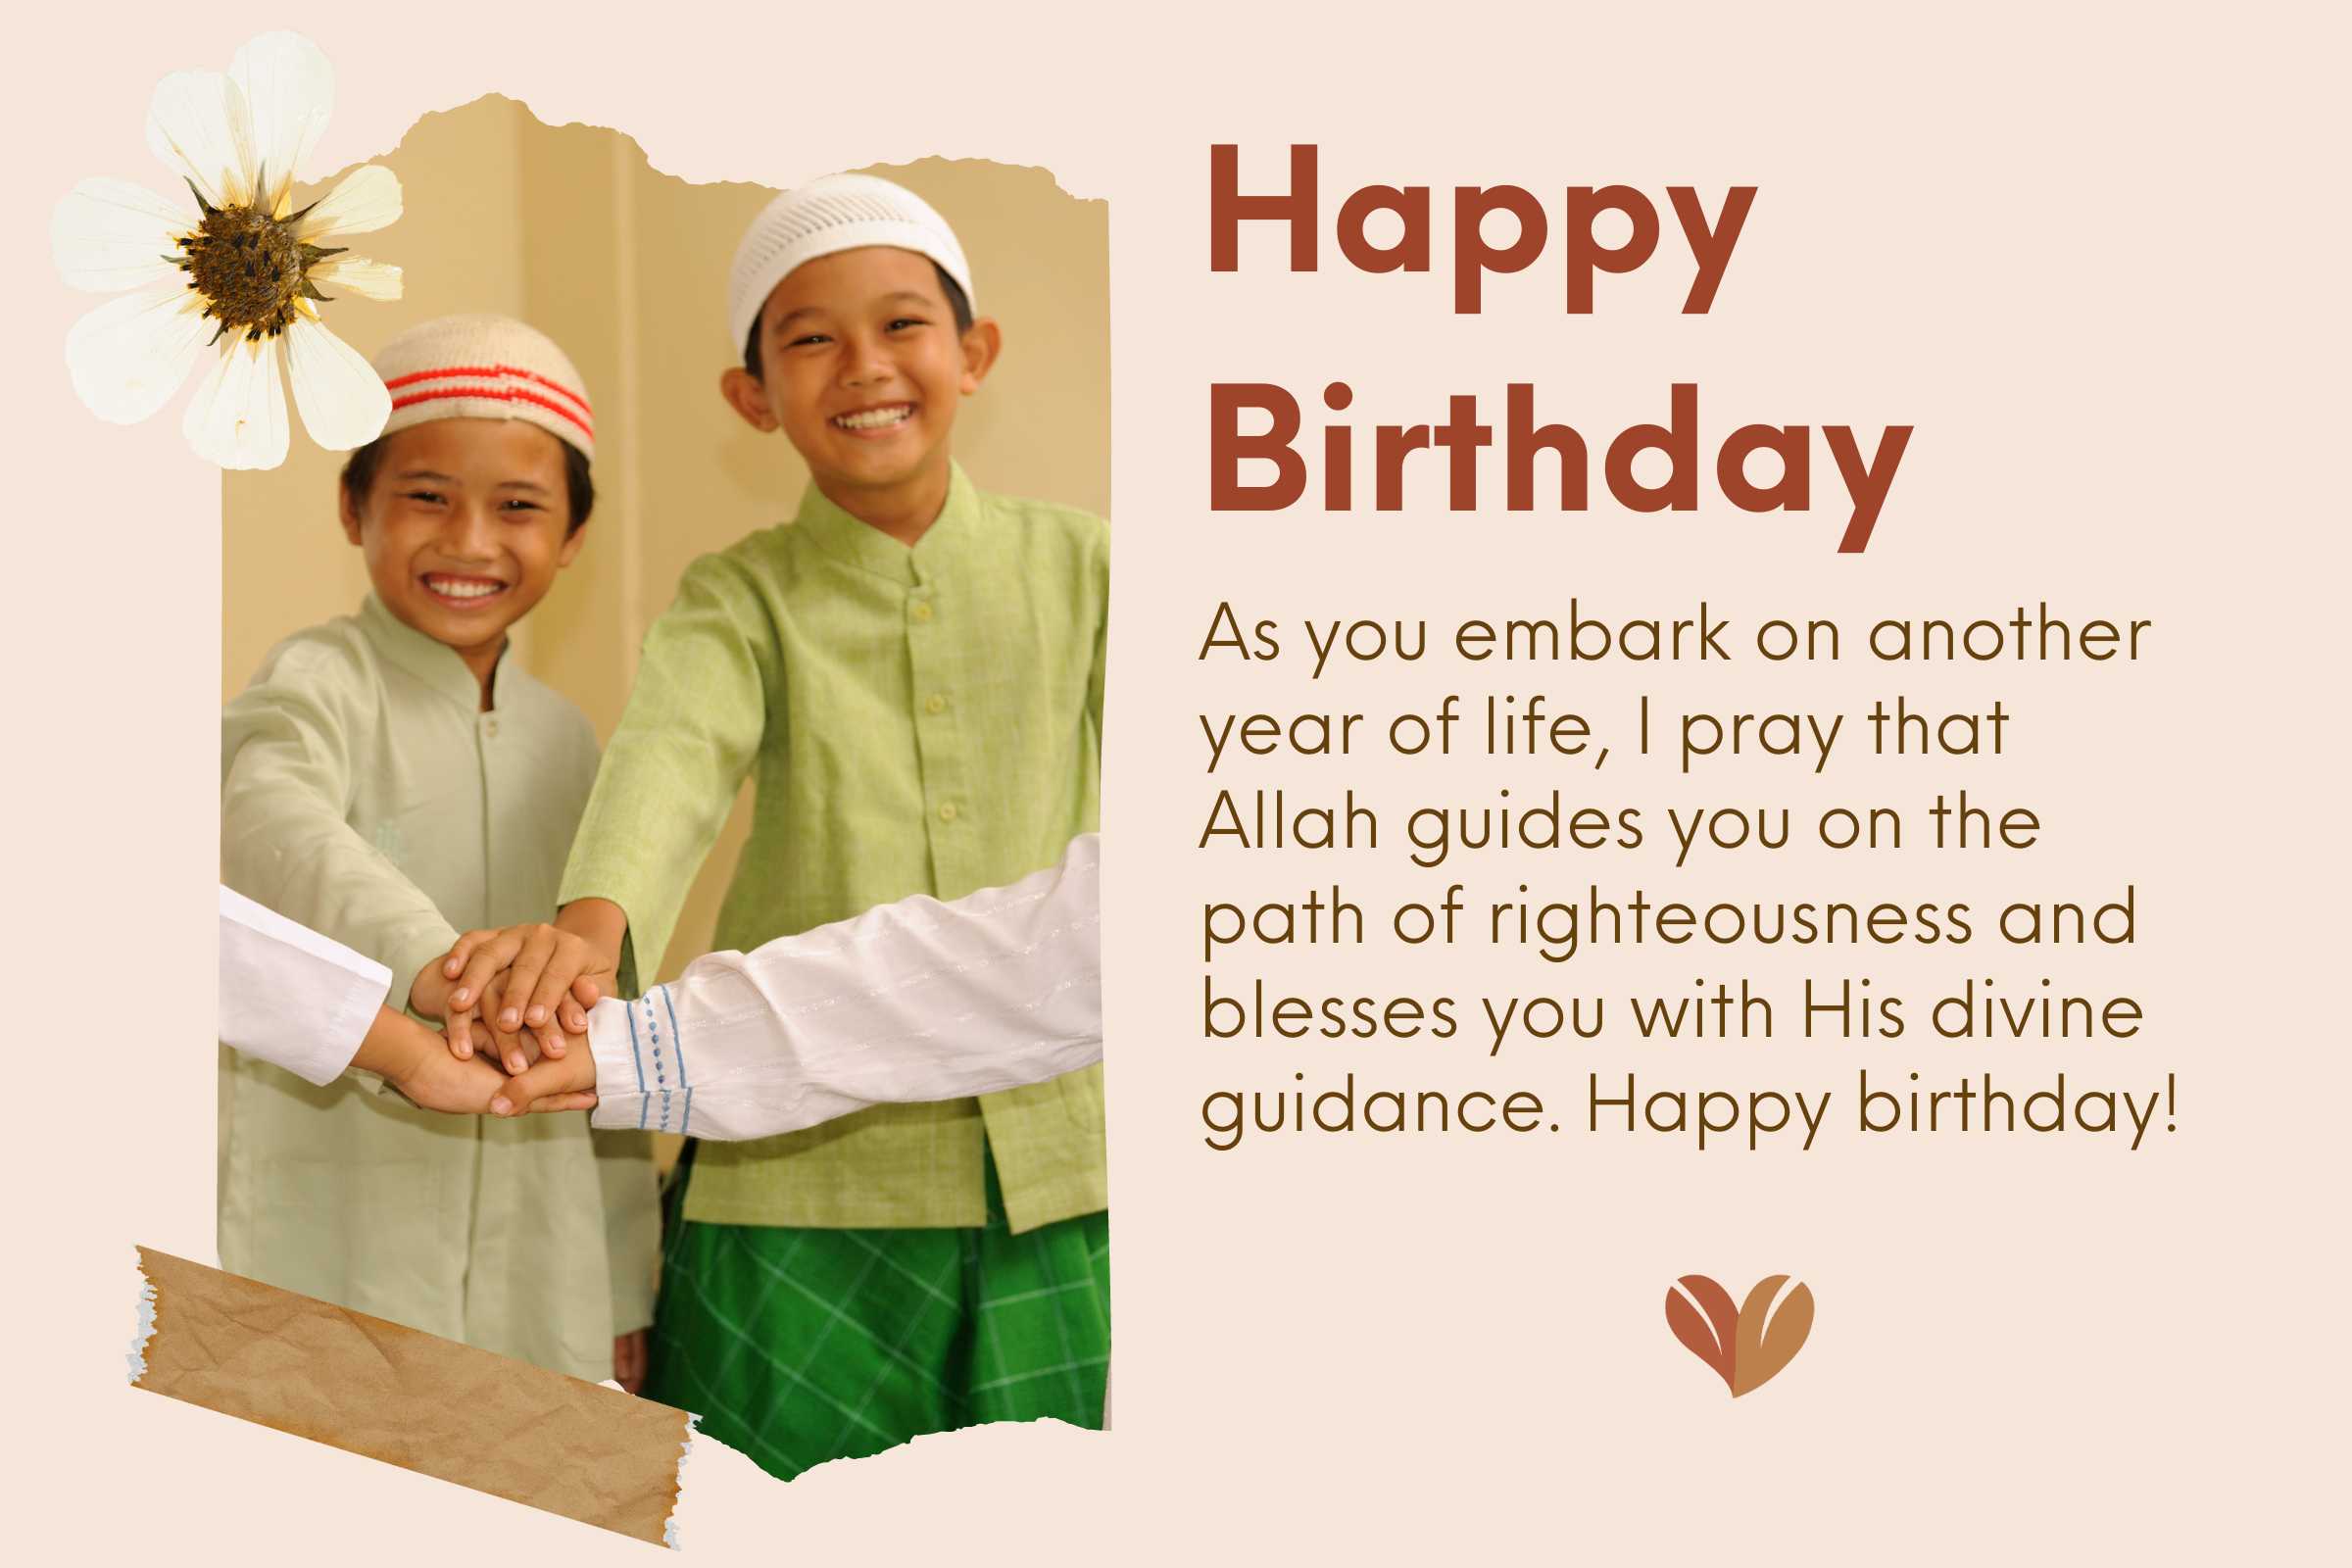 Praying Allah guides you on the path of righteousness and blesses - Islamic birthday wishes for brother